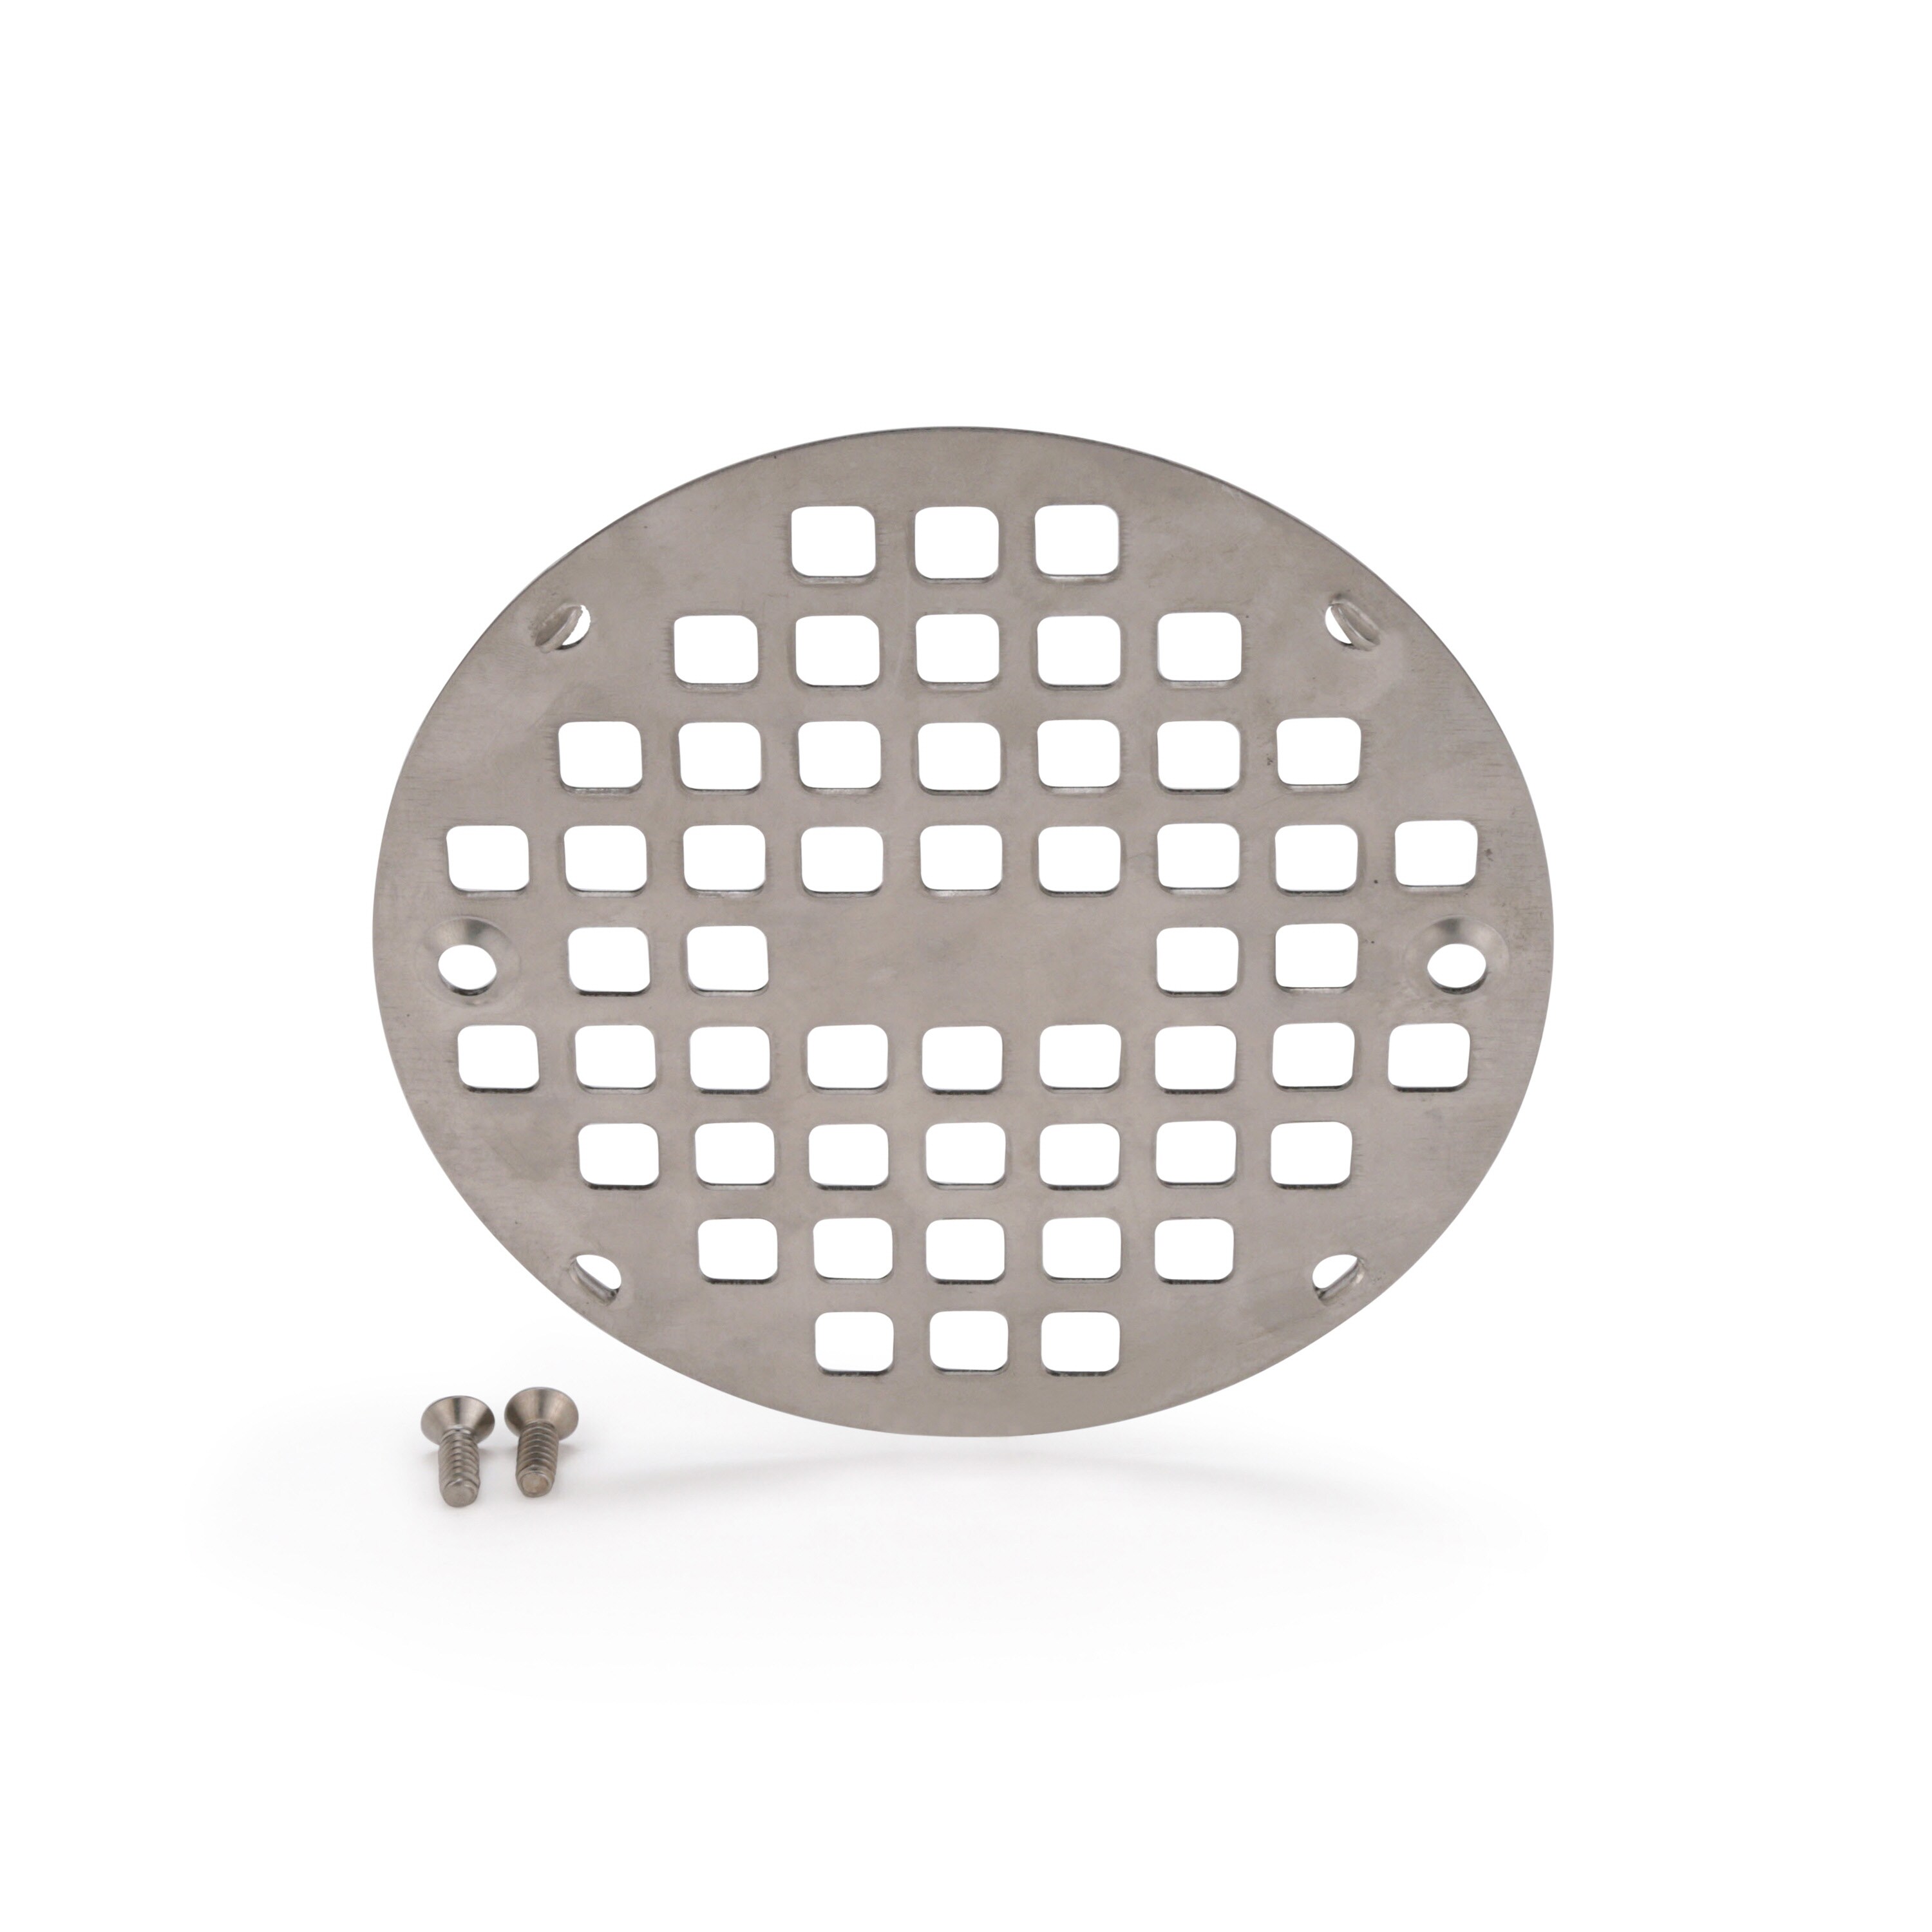 DANCO 5-3/4 in. Shower Drain Strainer in Brushed Nickel 10895 - The Home  Depot